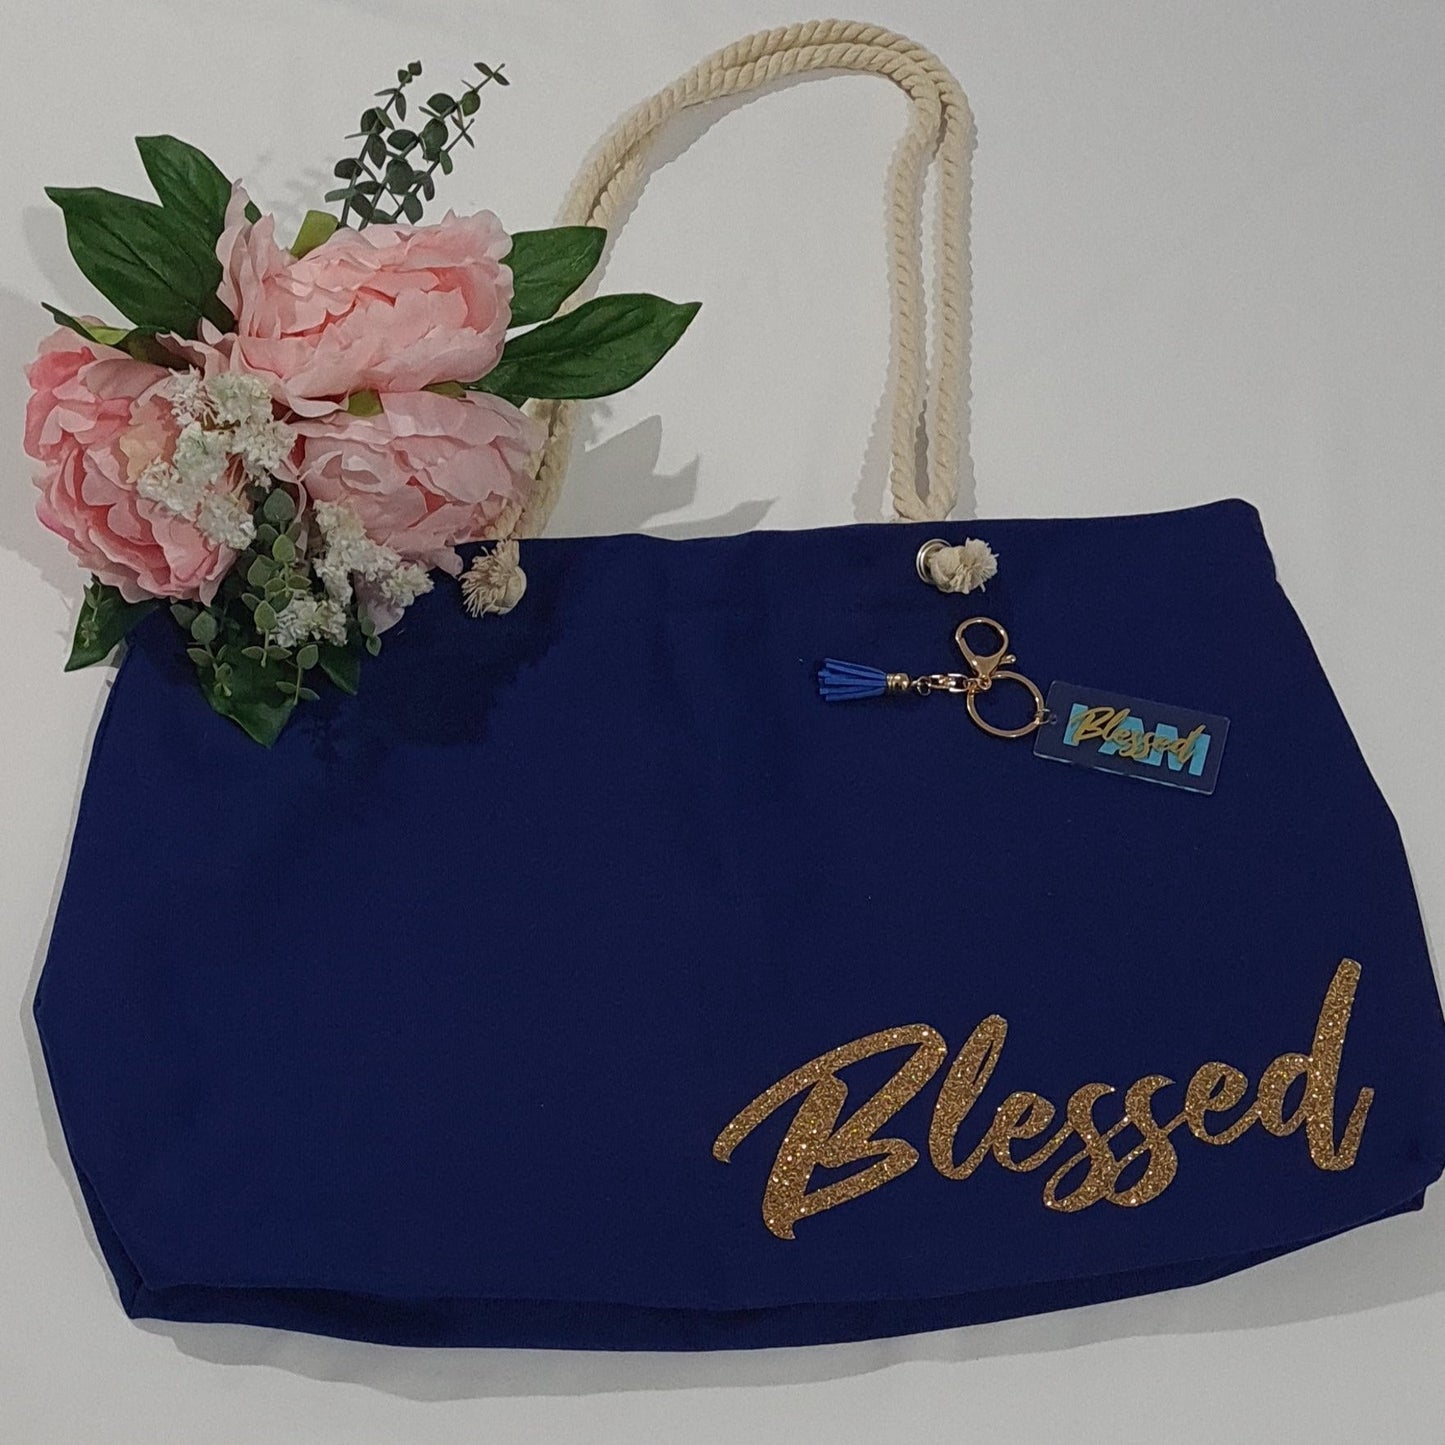 'BLESSED' TOTE BAG